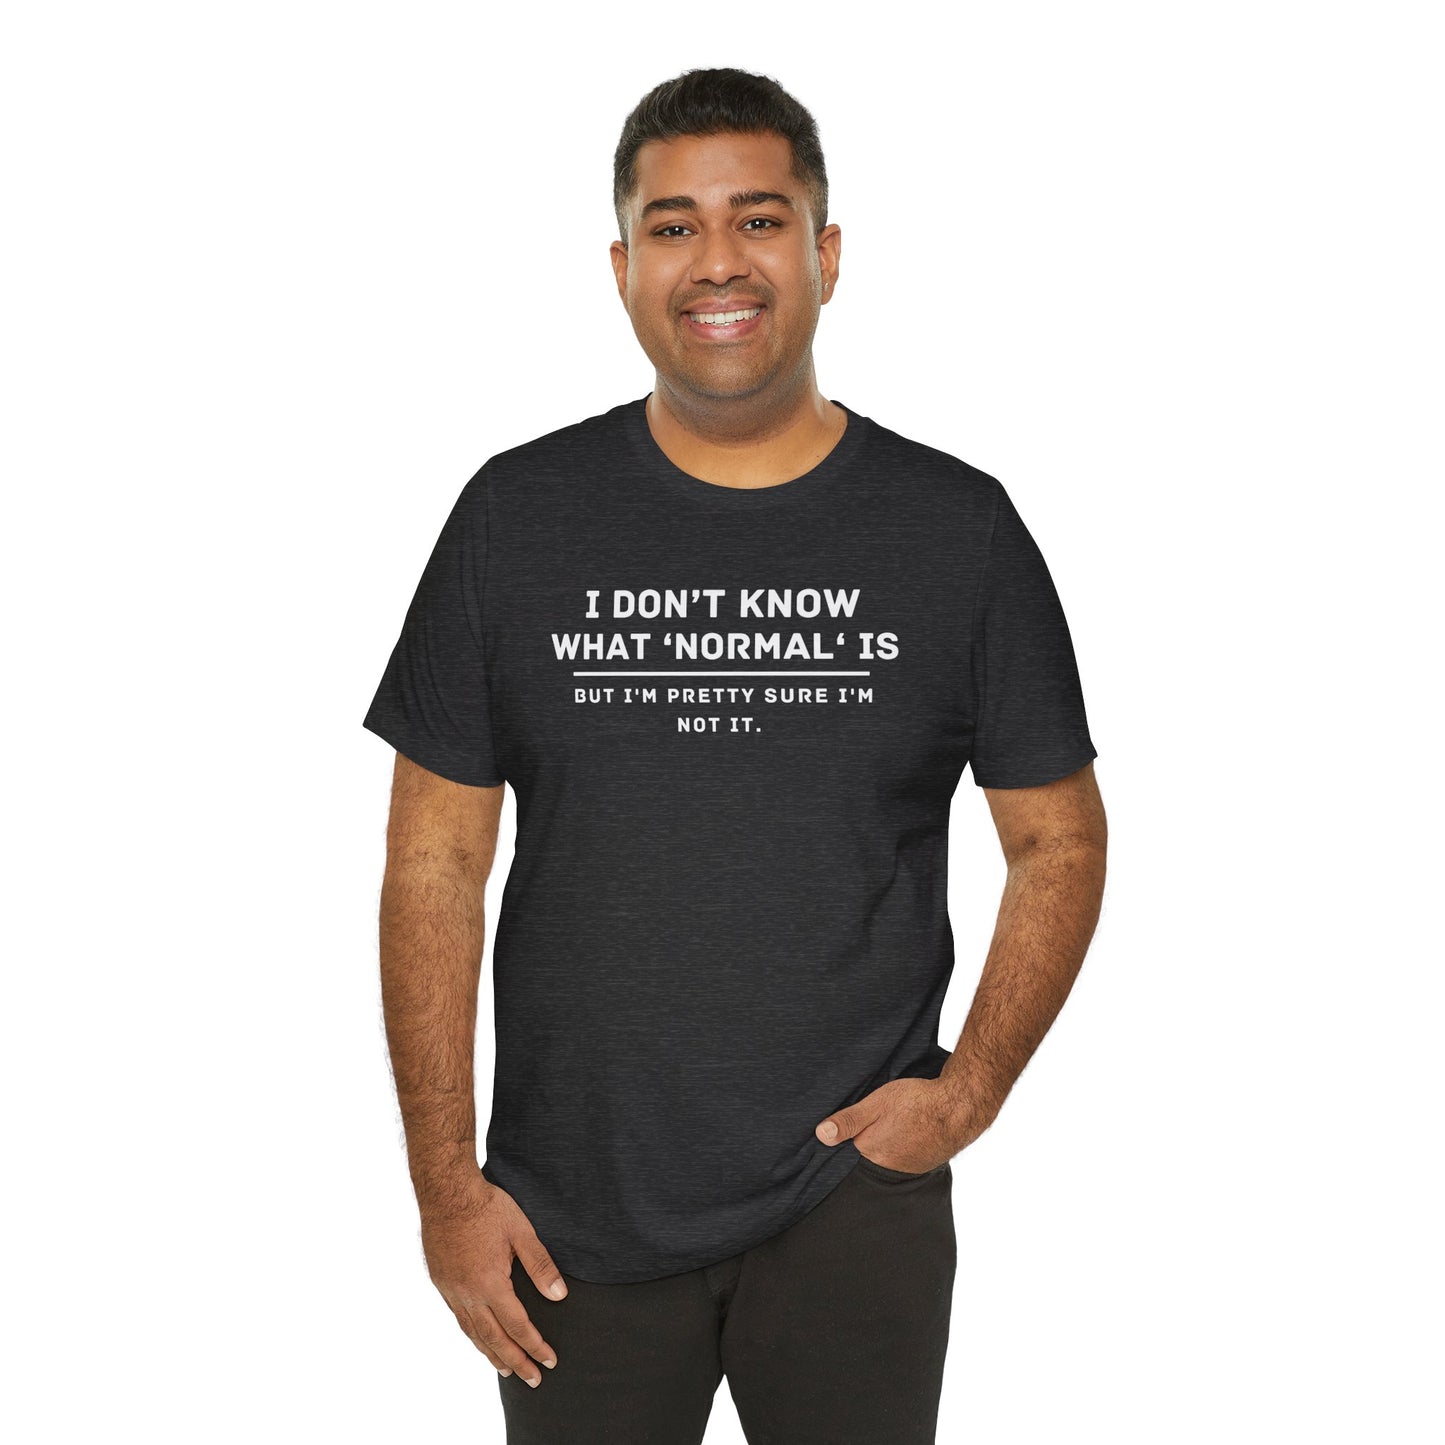 Embrace Uniqueness T-Shirt: 'Normal' Redefined – Stand Out & Express Yourself